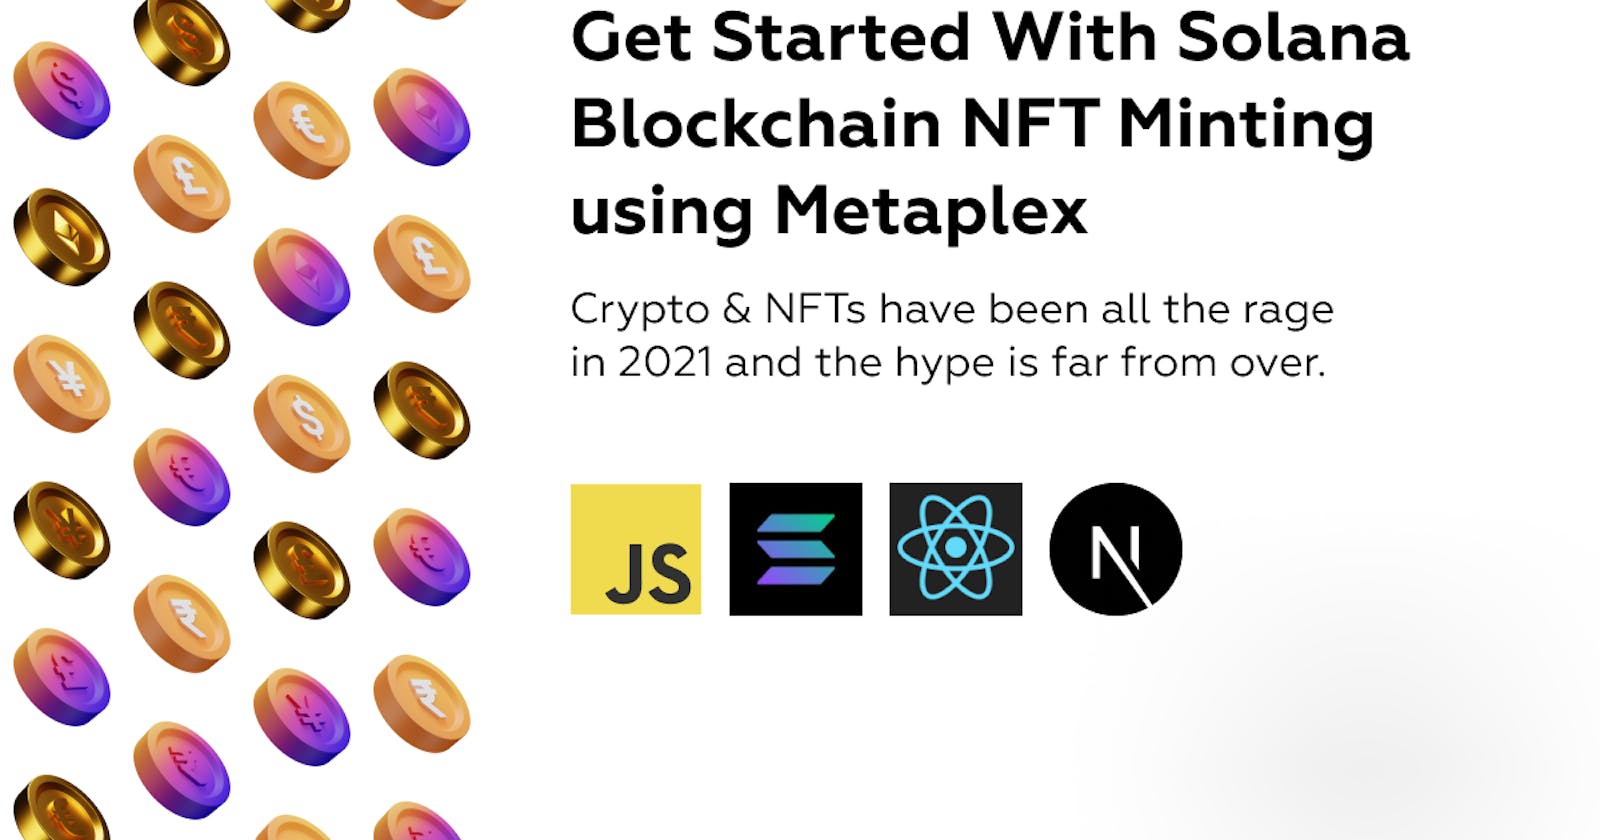 Get Started With Solana Blockchain NFT Minting using Metaplex